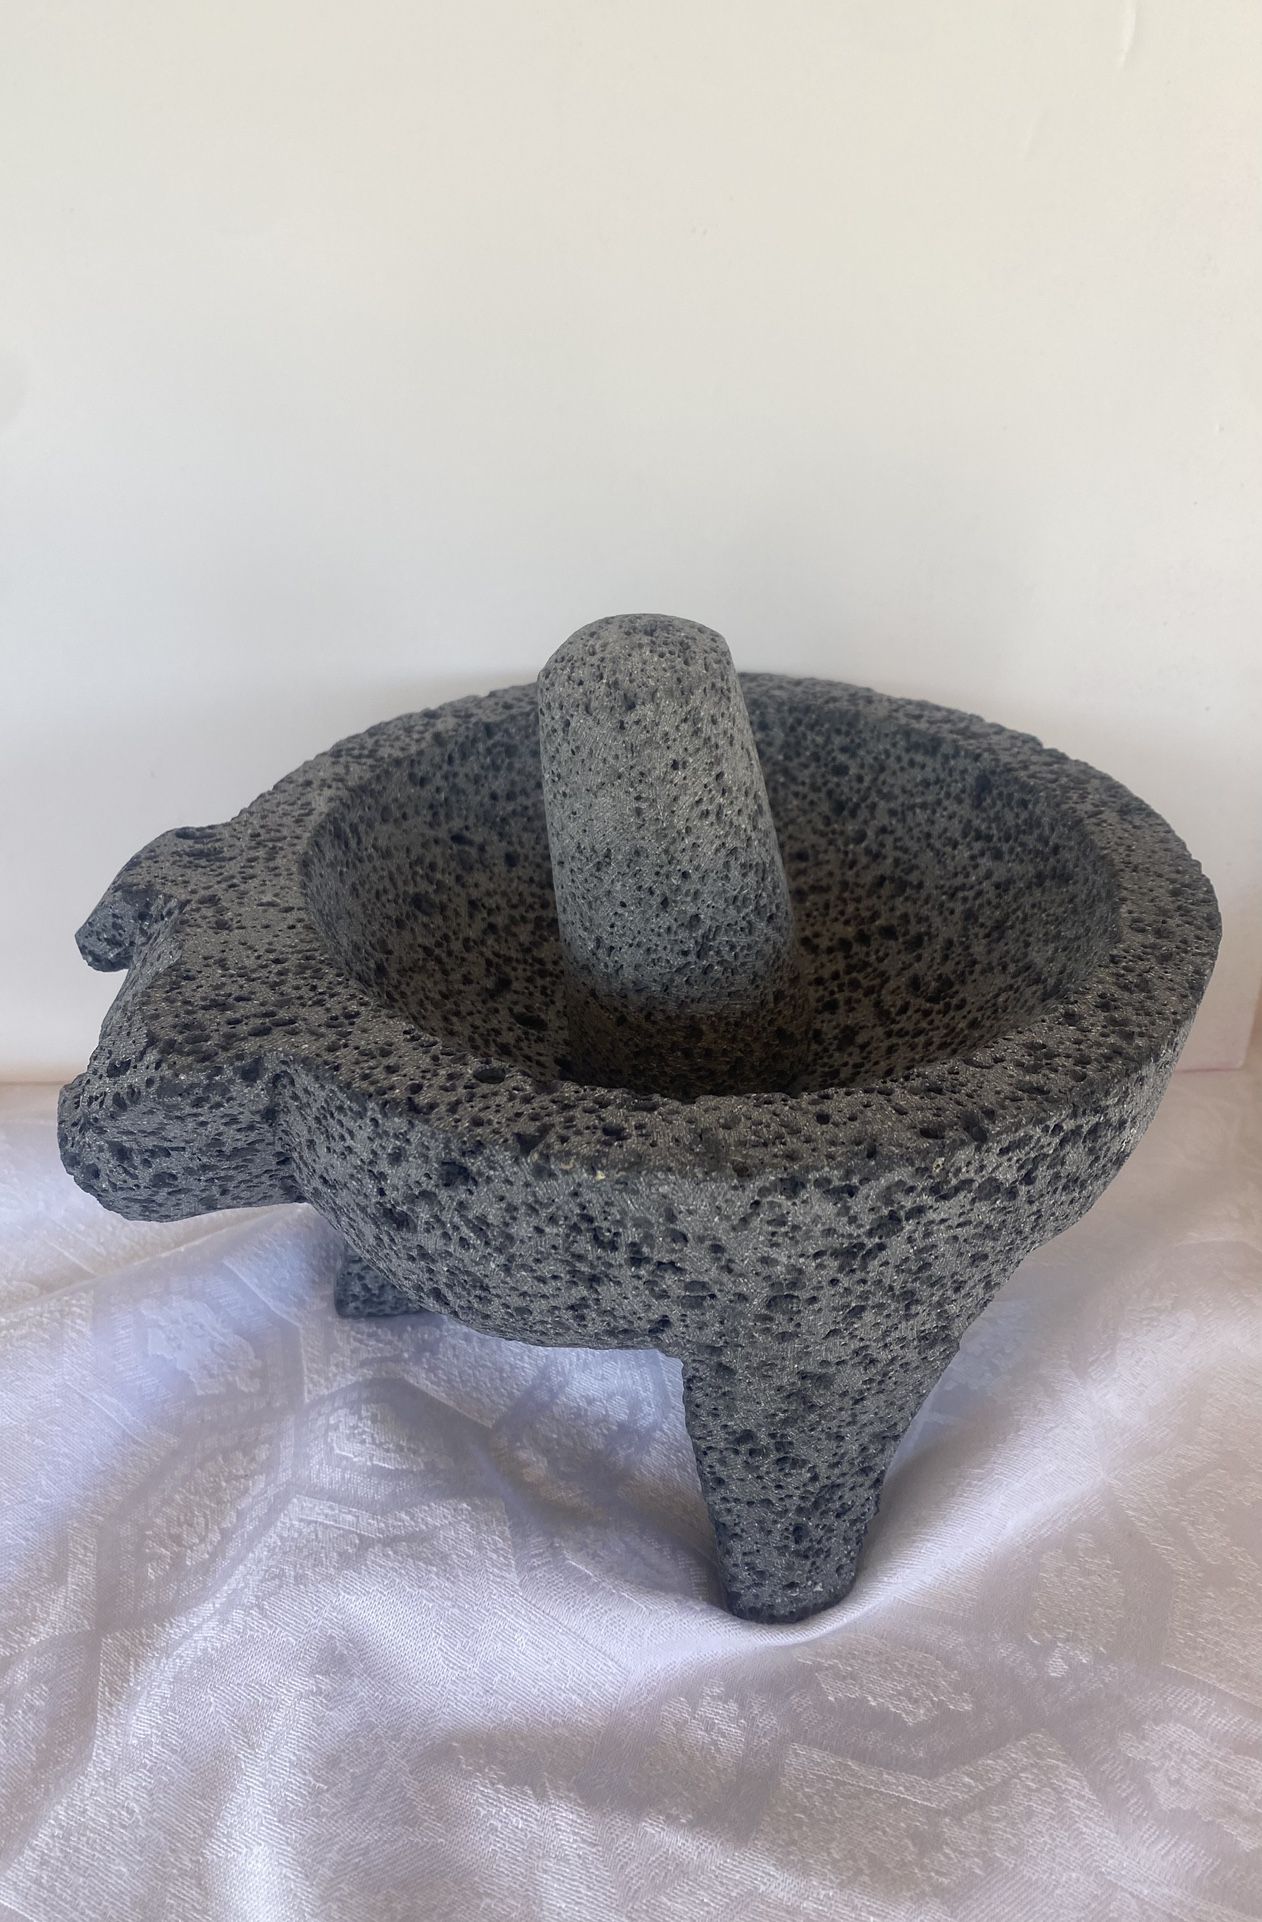 Molcajete 8” round by 5 1/2” tall